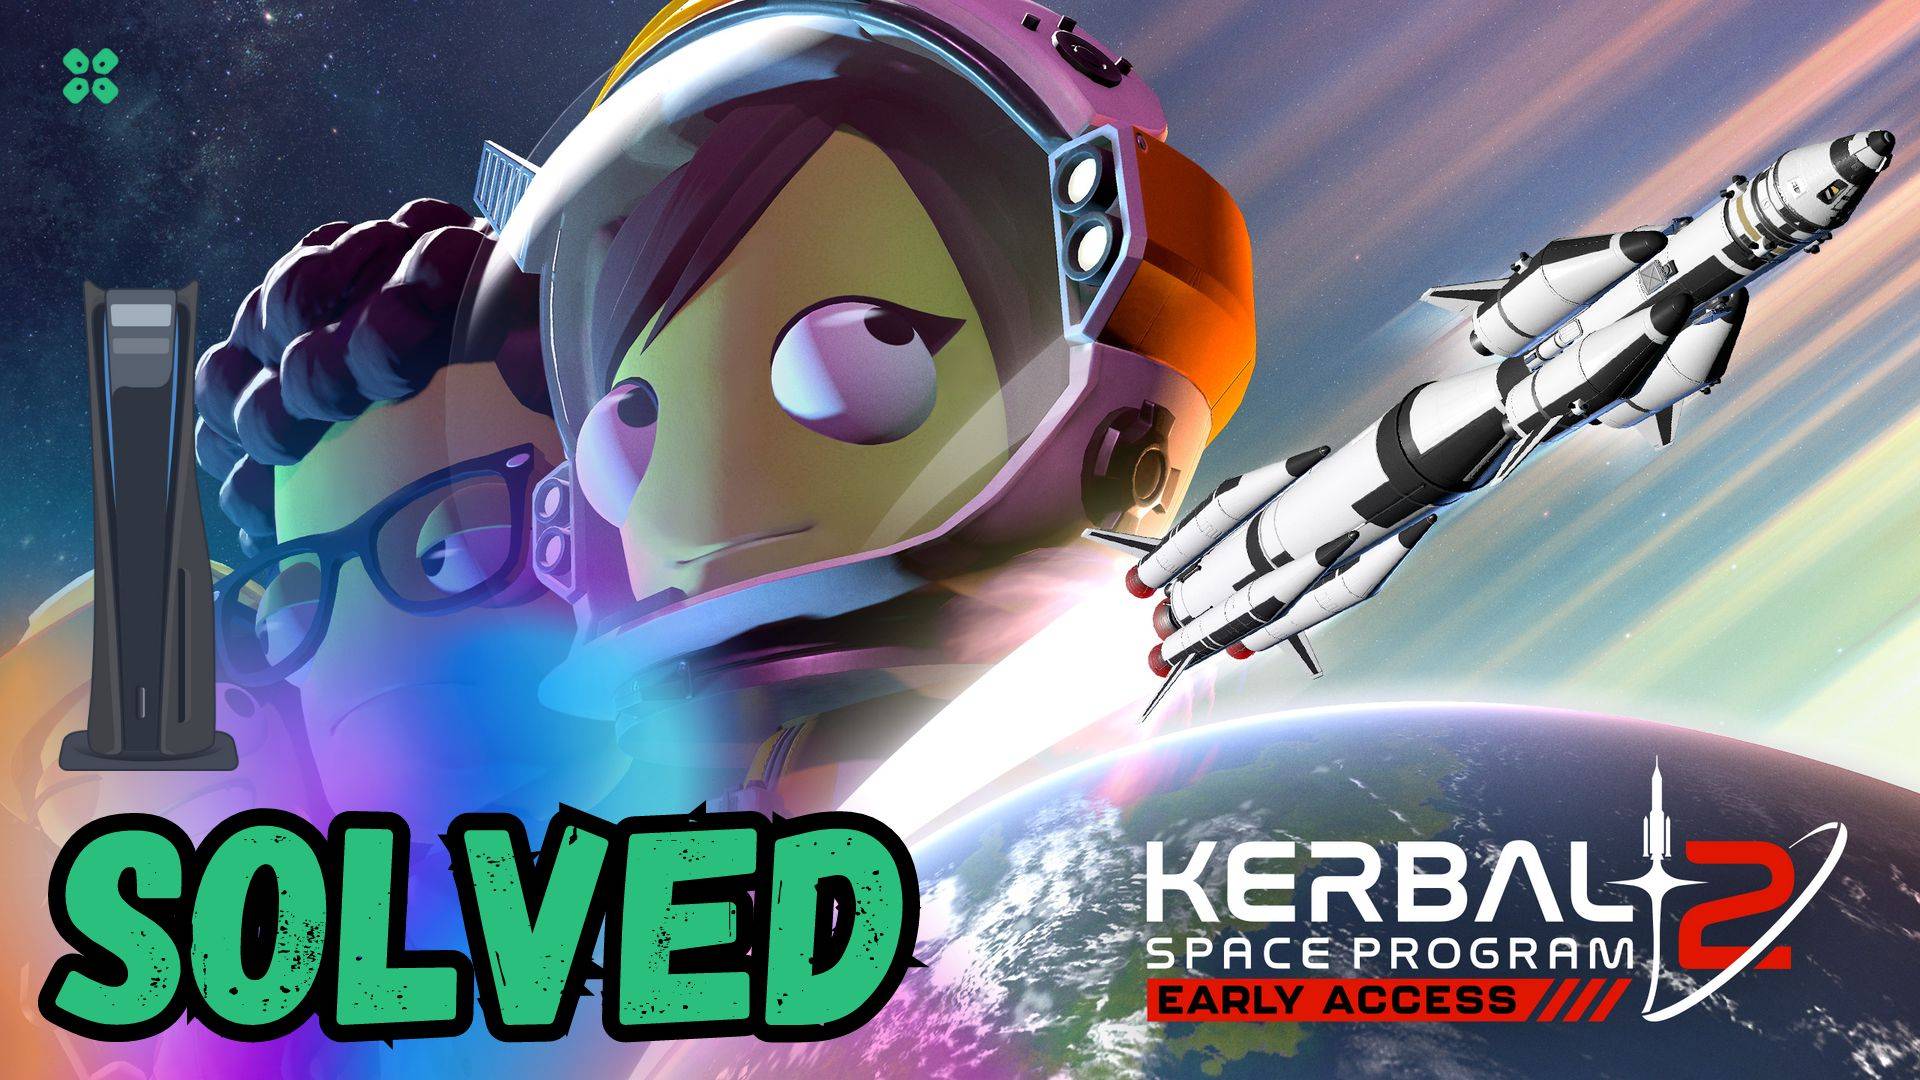 Artwork of Kerbal Space Program 2 and its fix of lagging by TCG